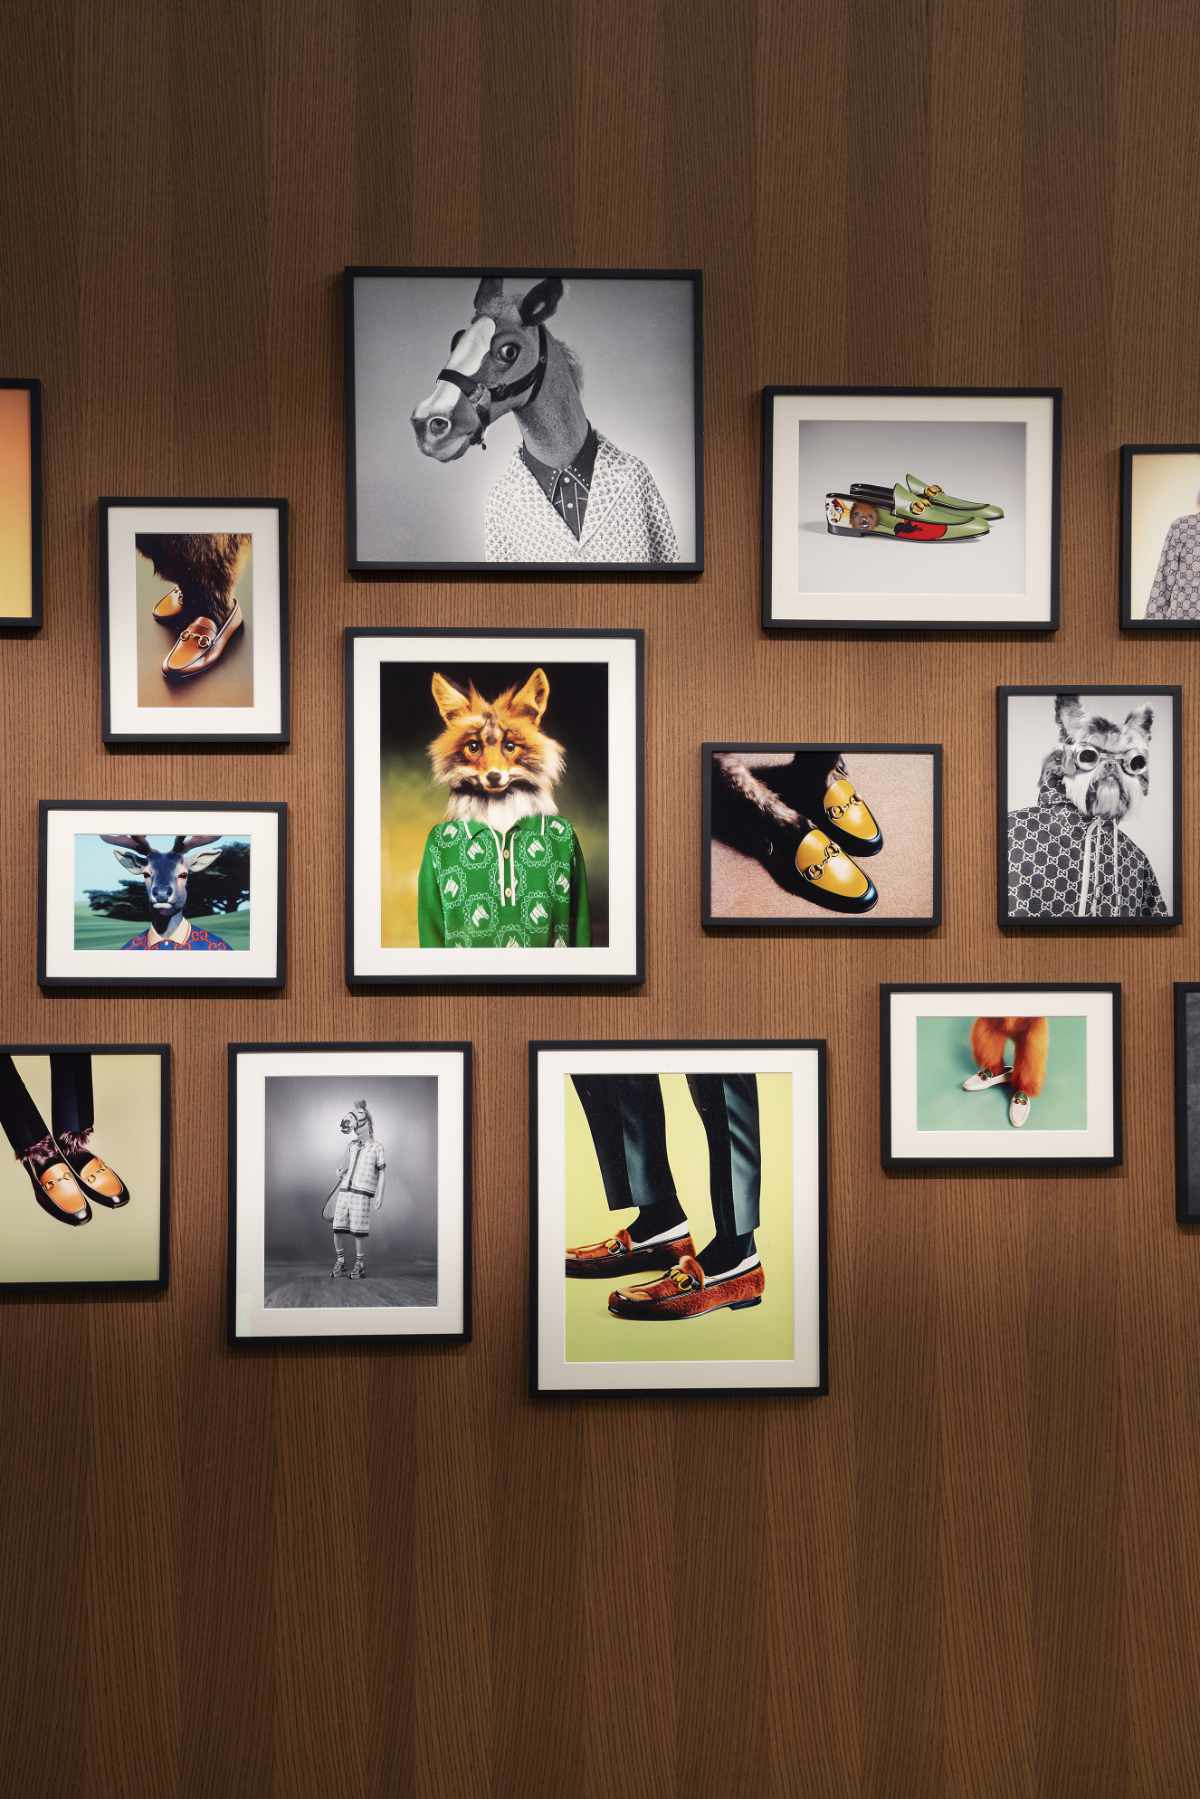 70 Years Of An Icon: The Gucci Horsebit Loafer